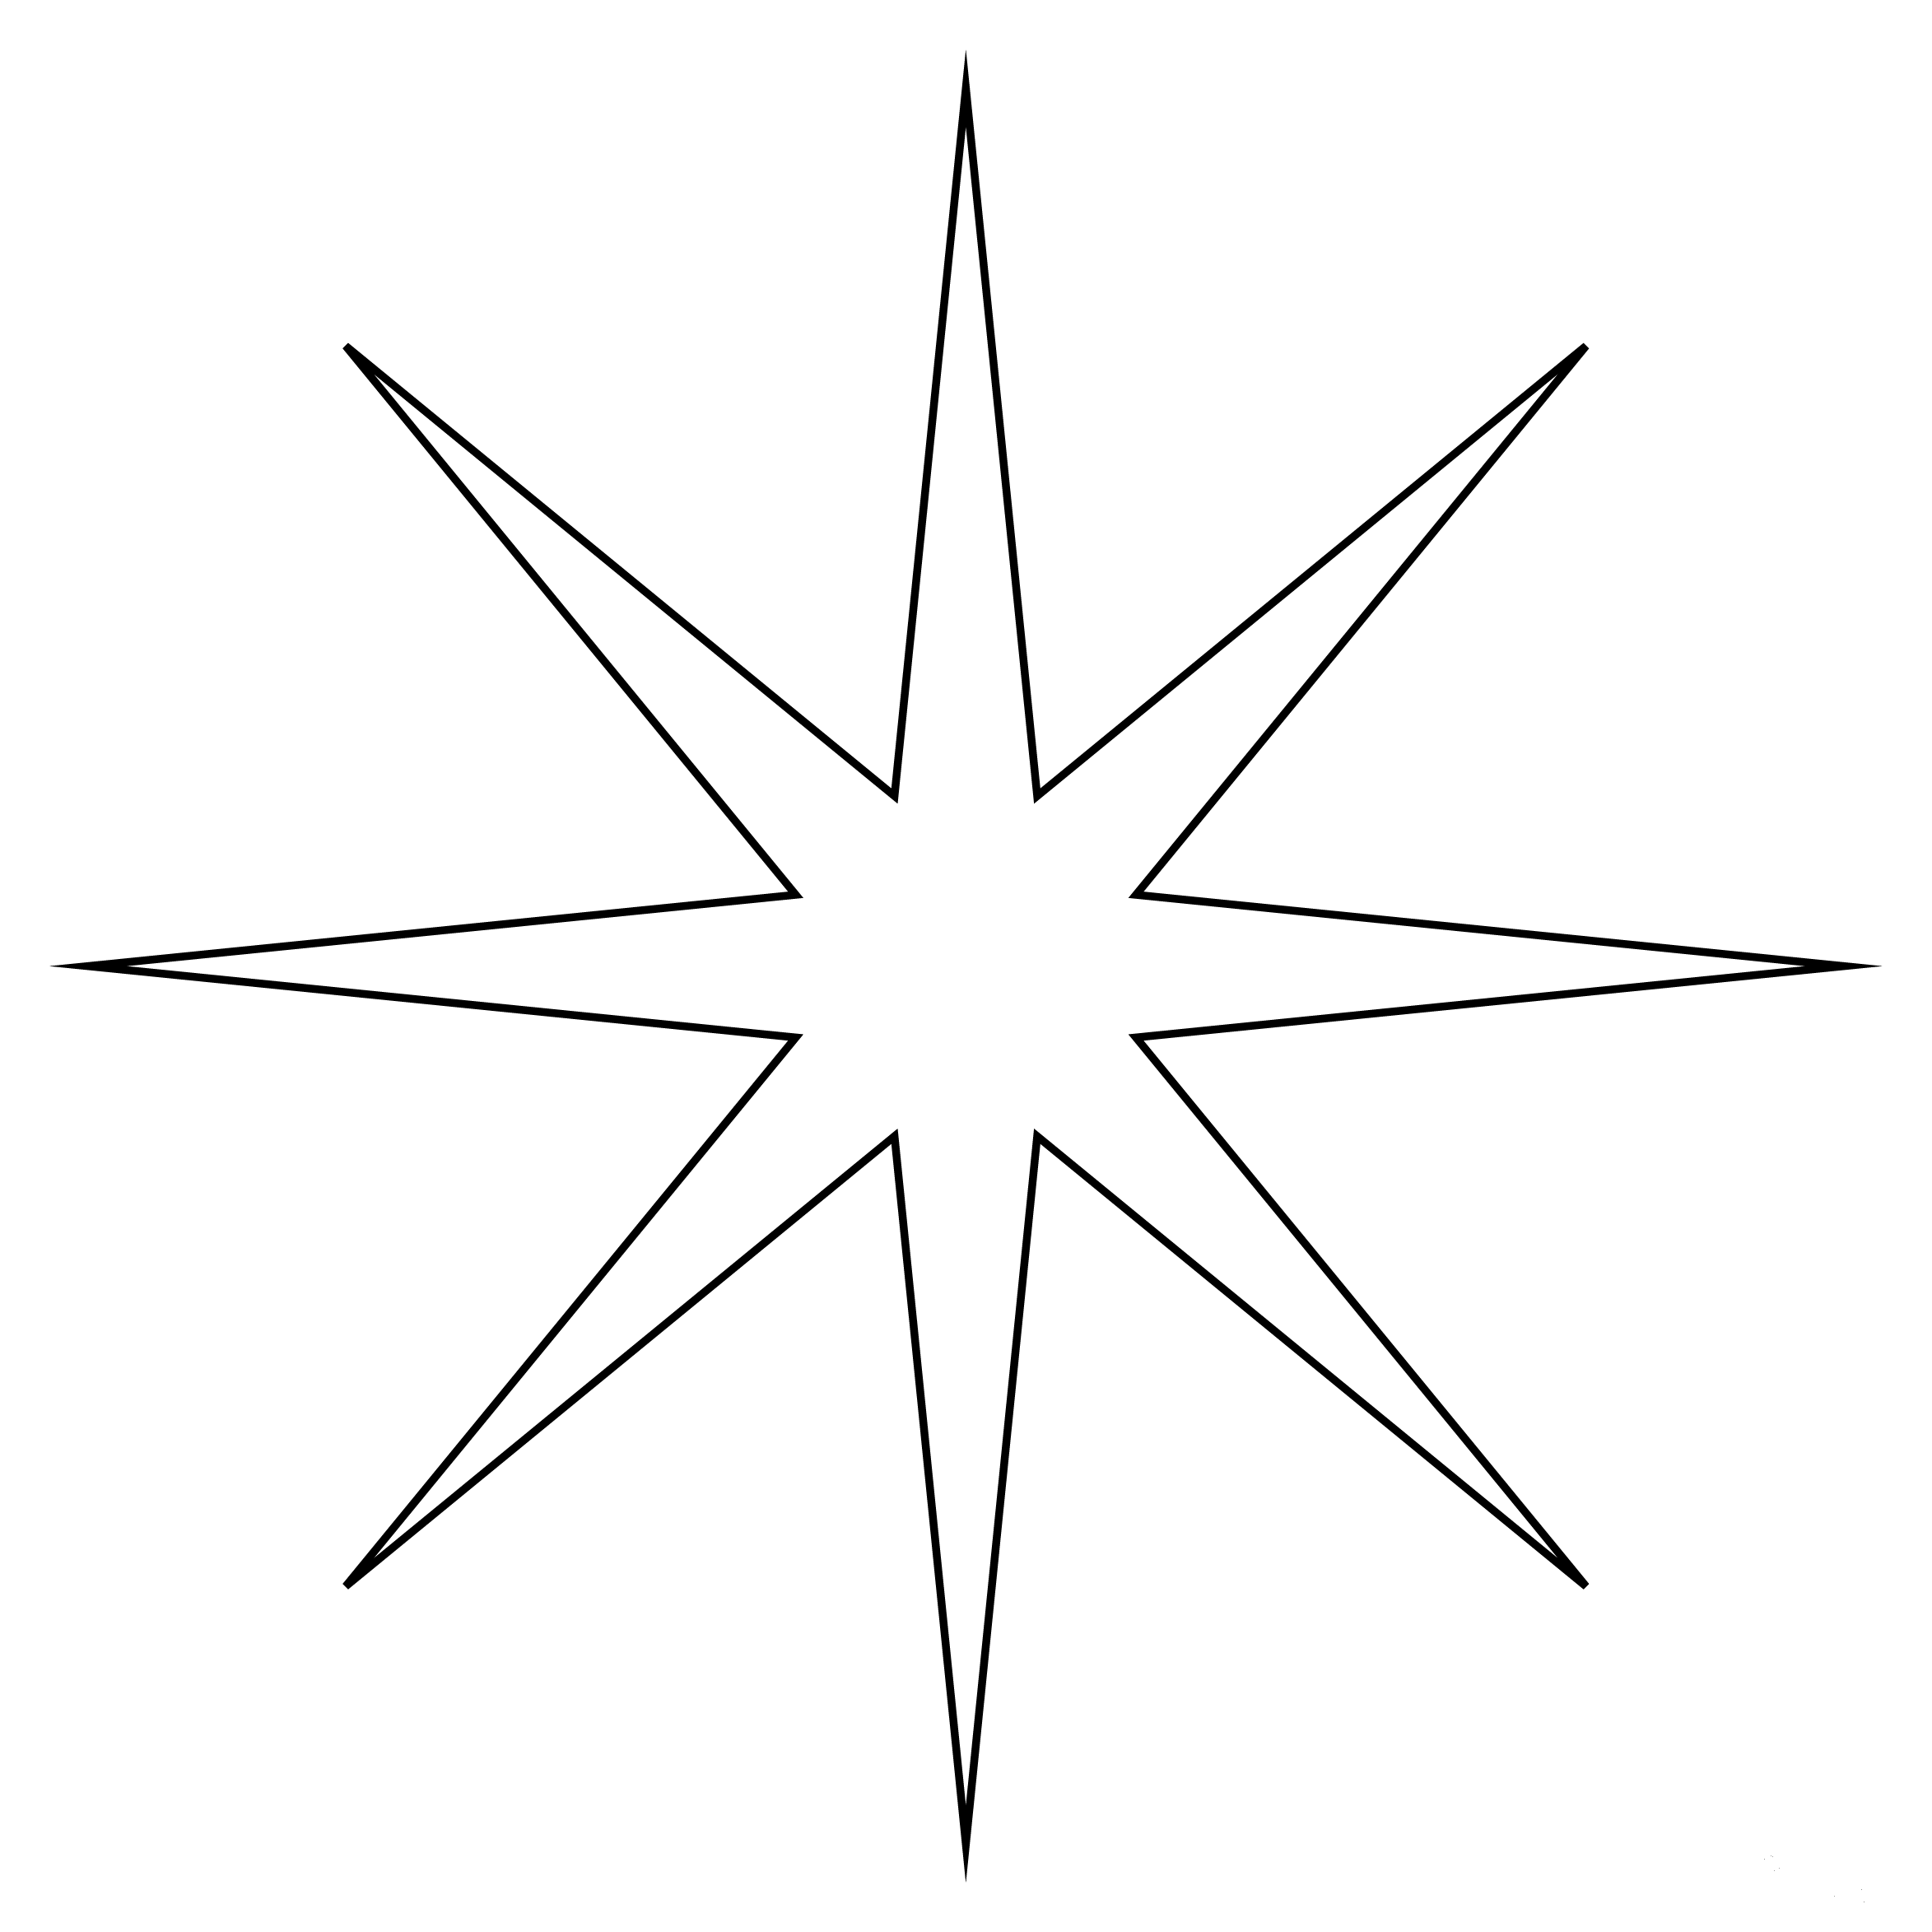 Eight Spoked Asterisk coloring page - ColouringPages